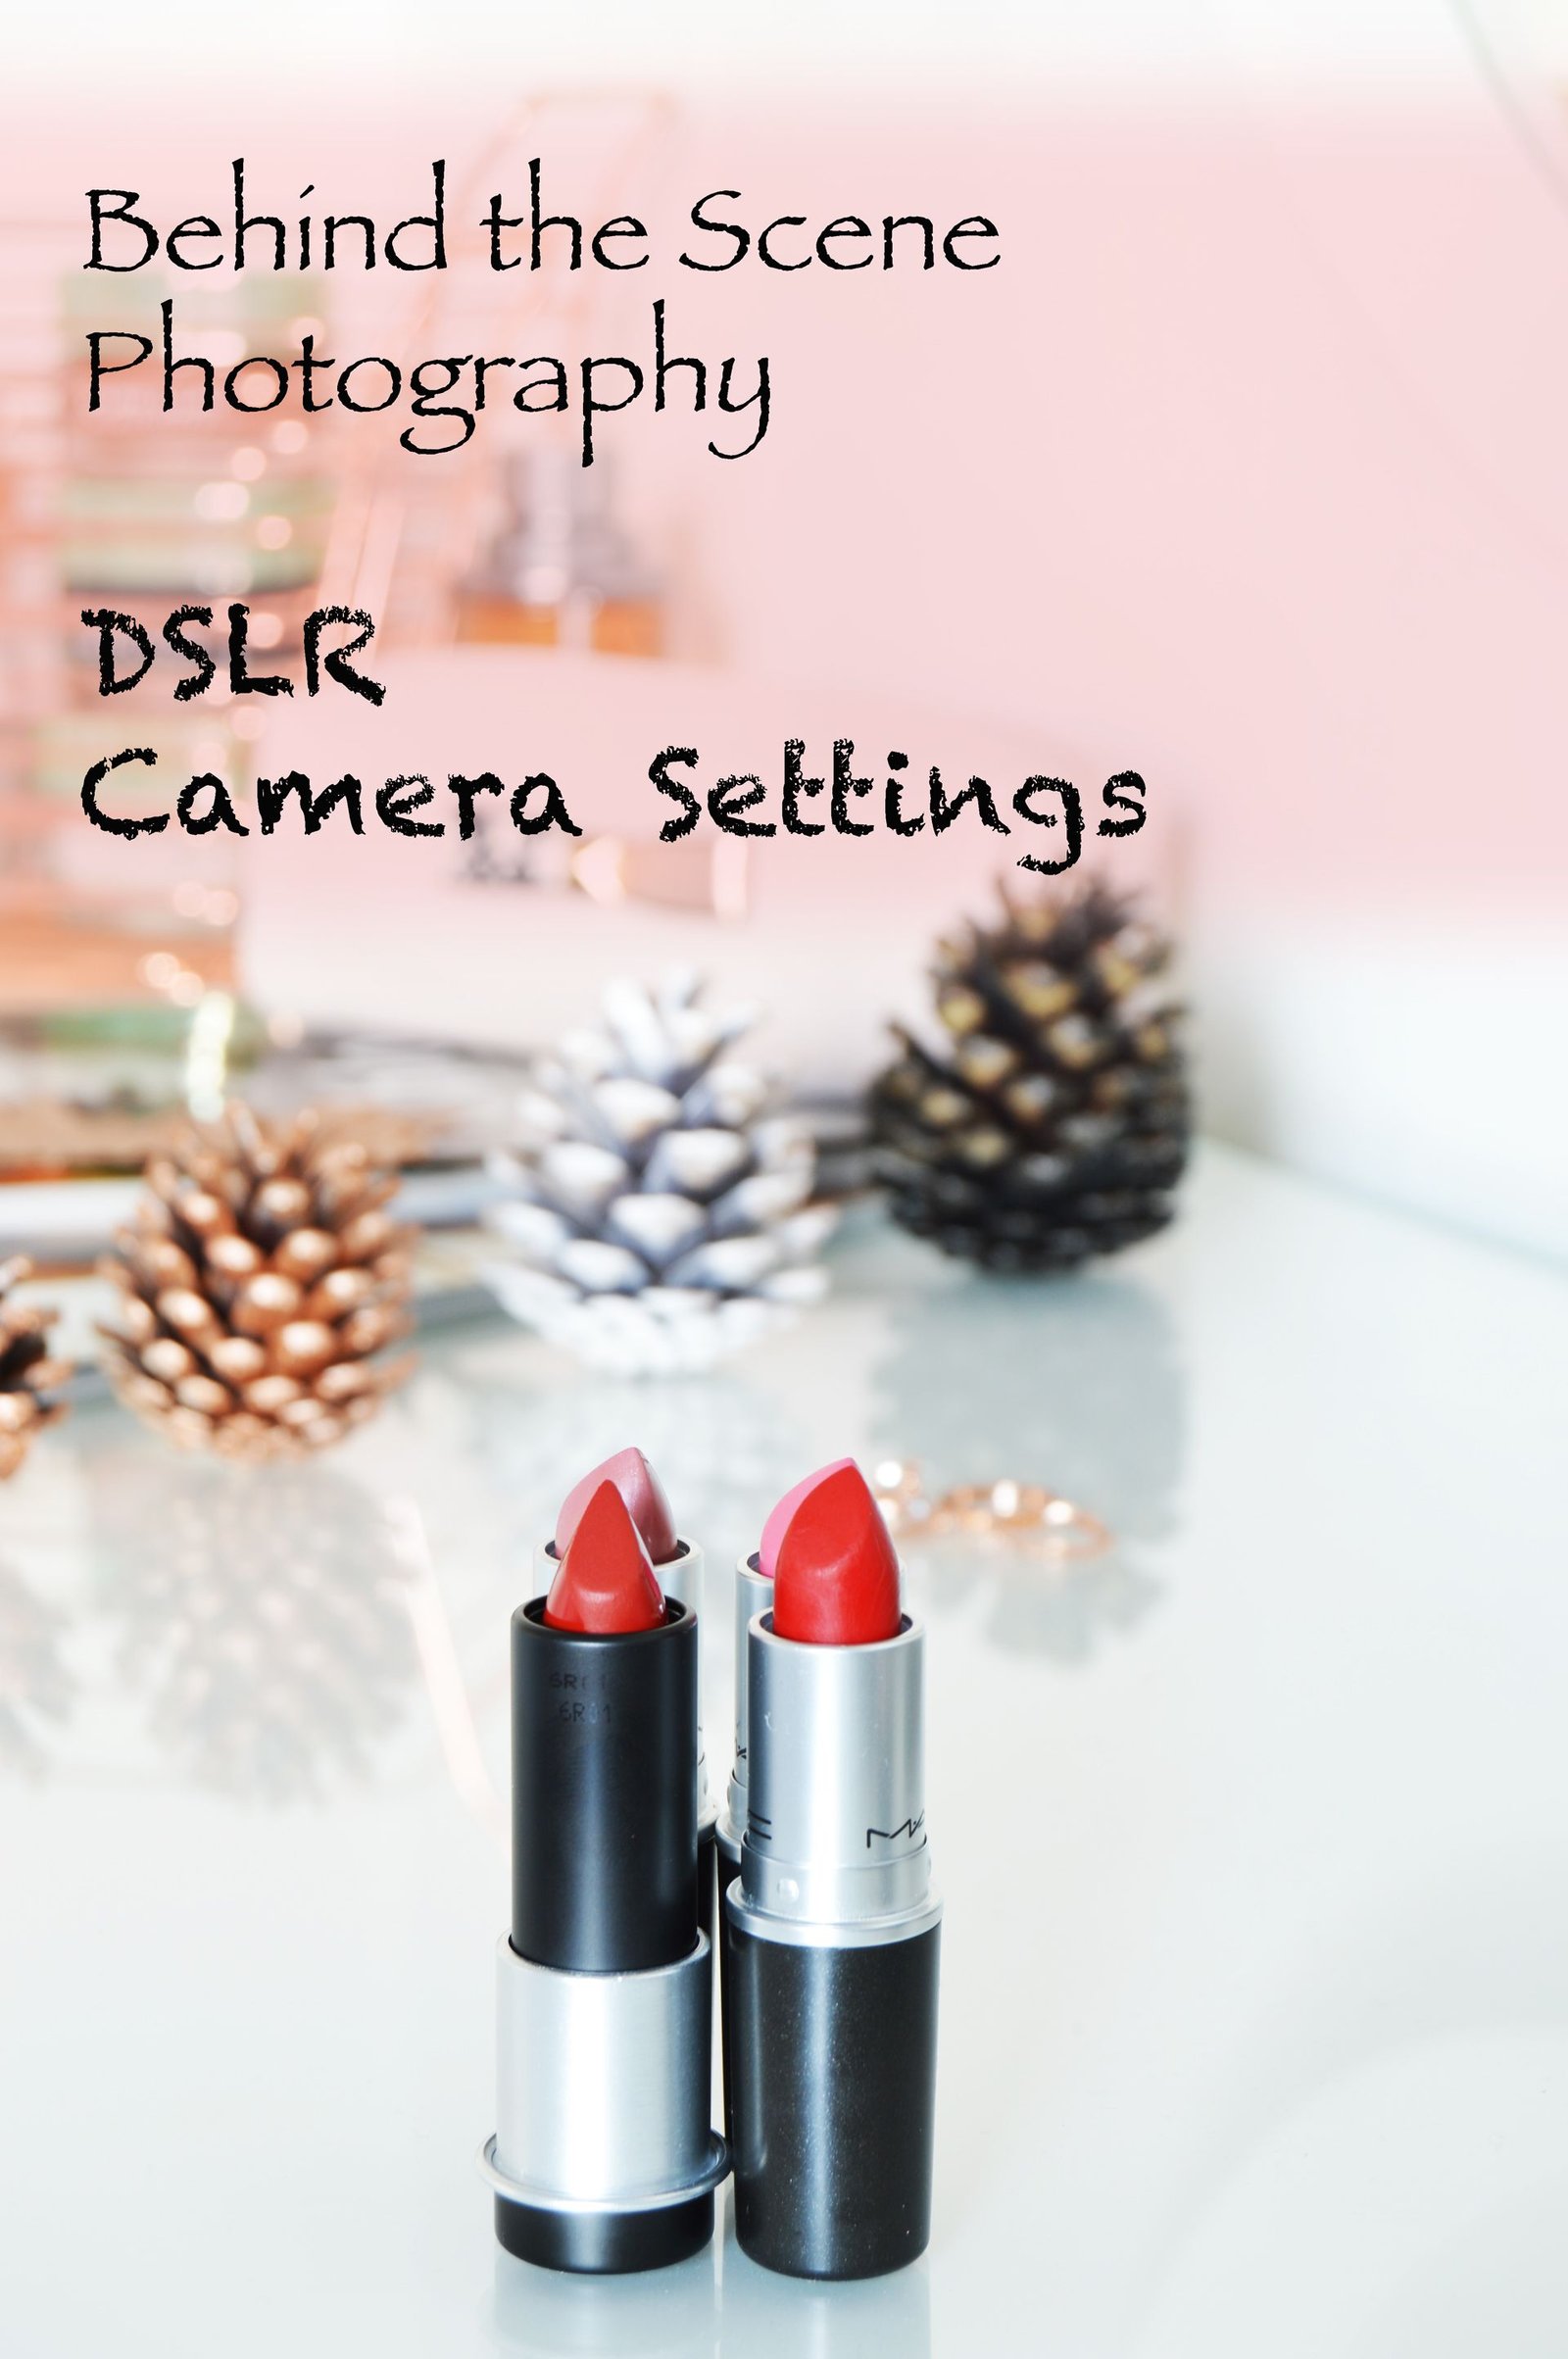 Behind the Scene Photography - DSLR Camera Settings